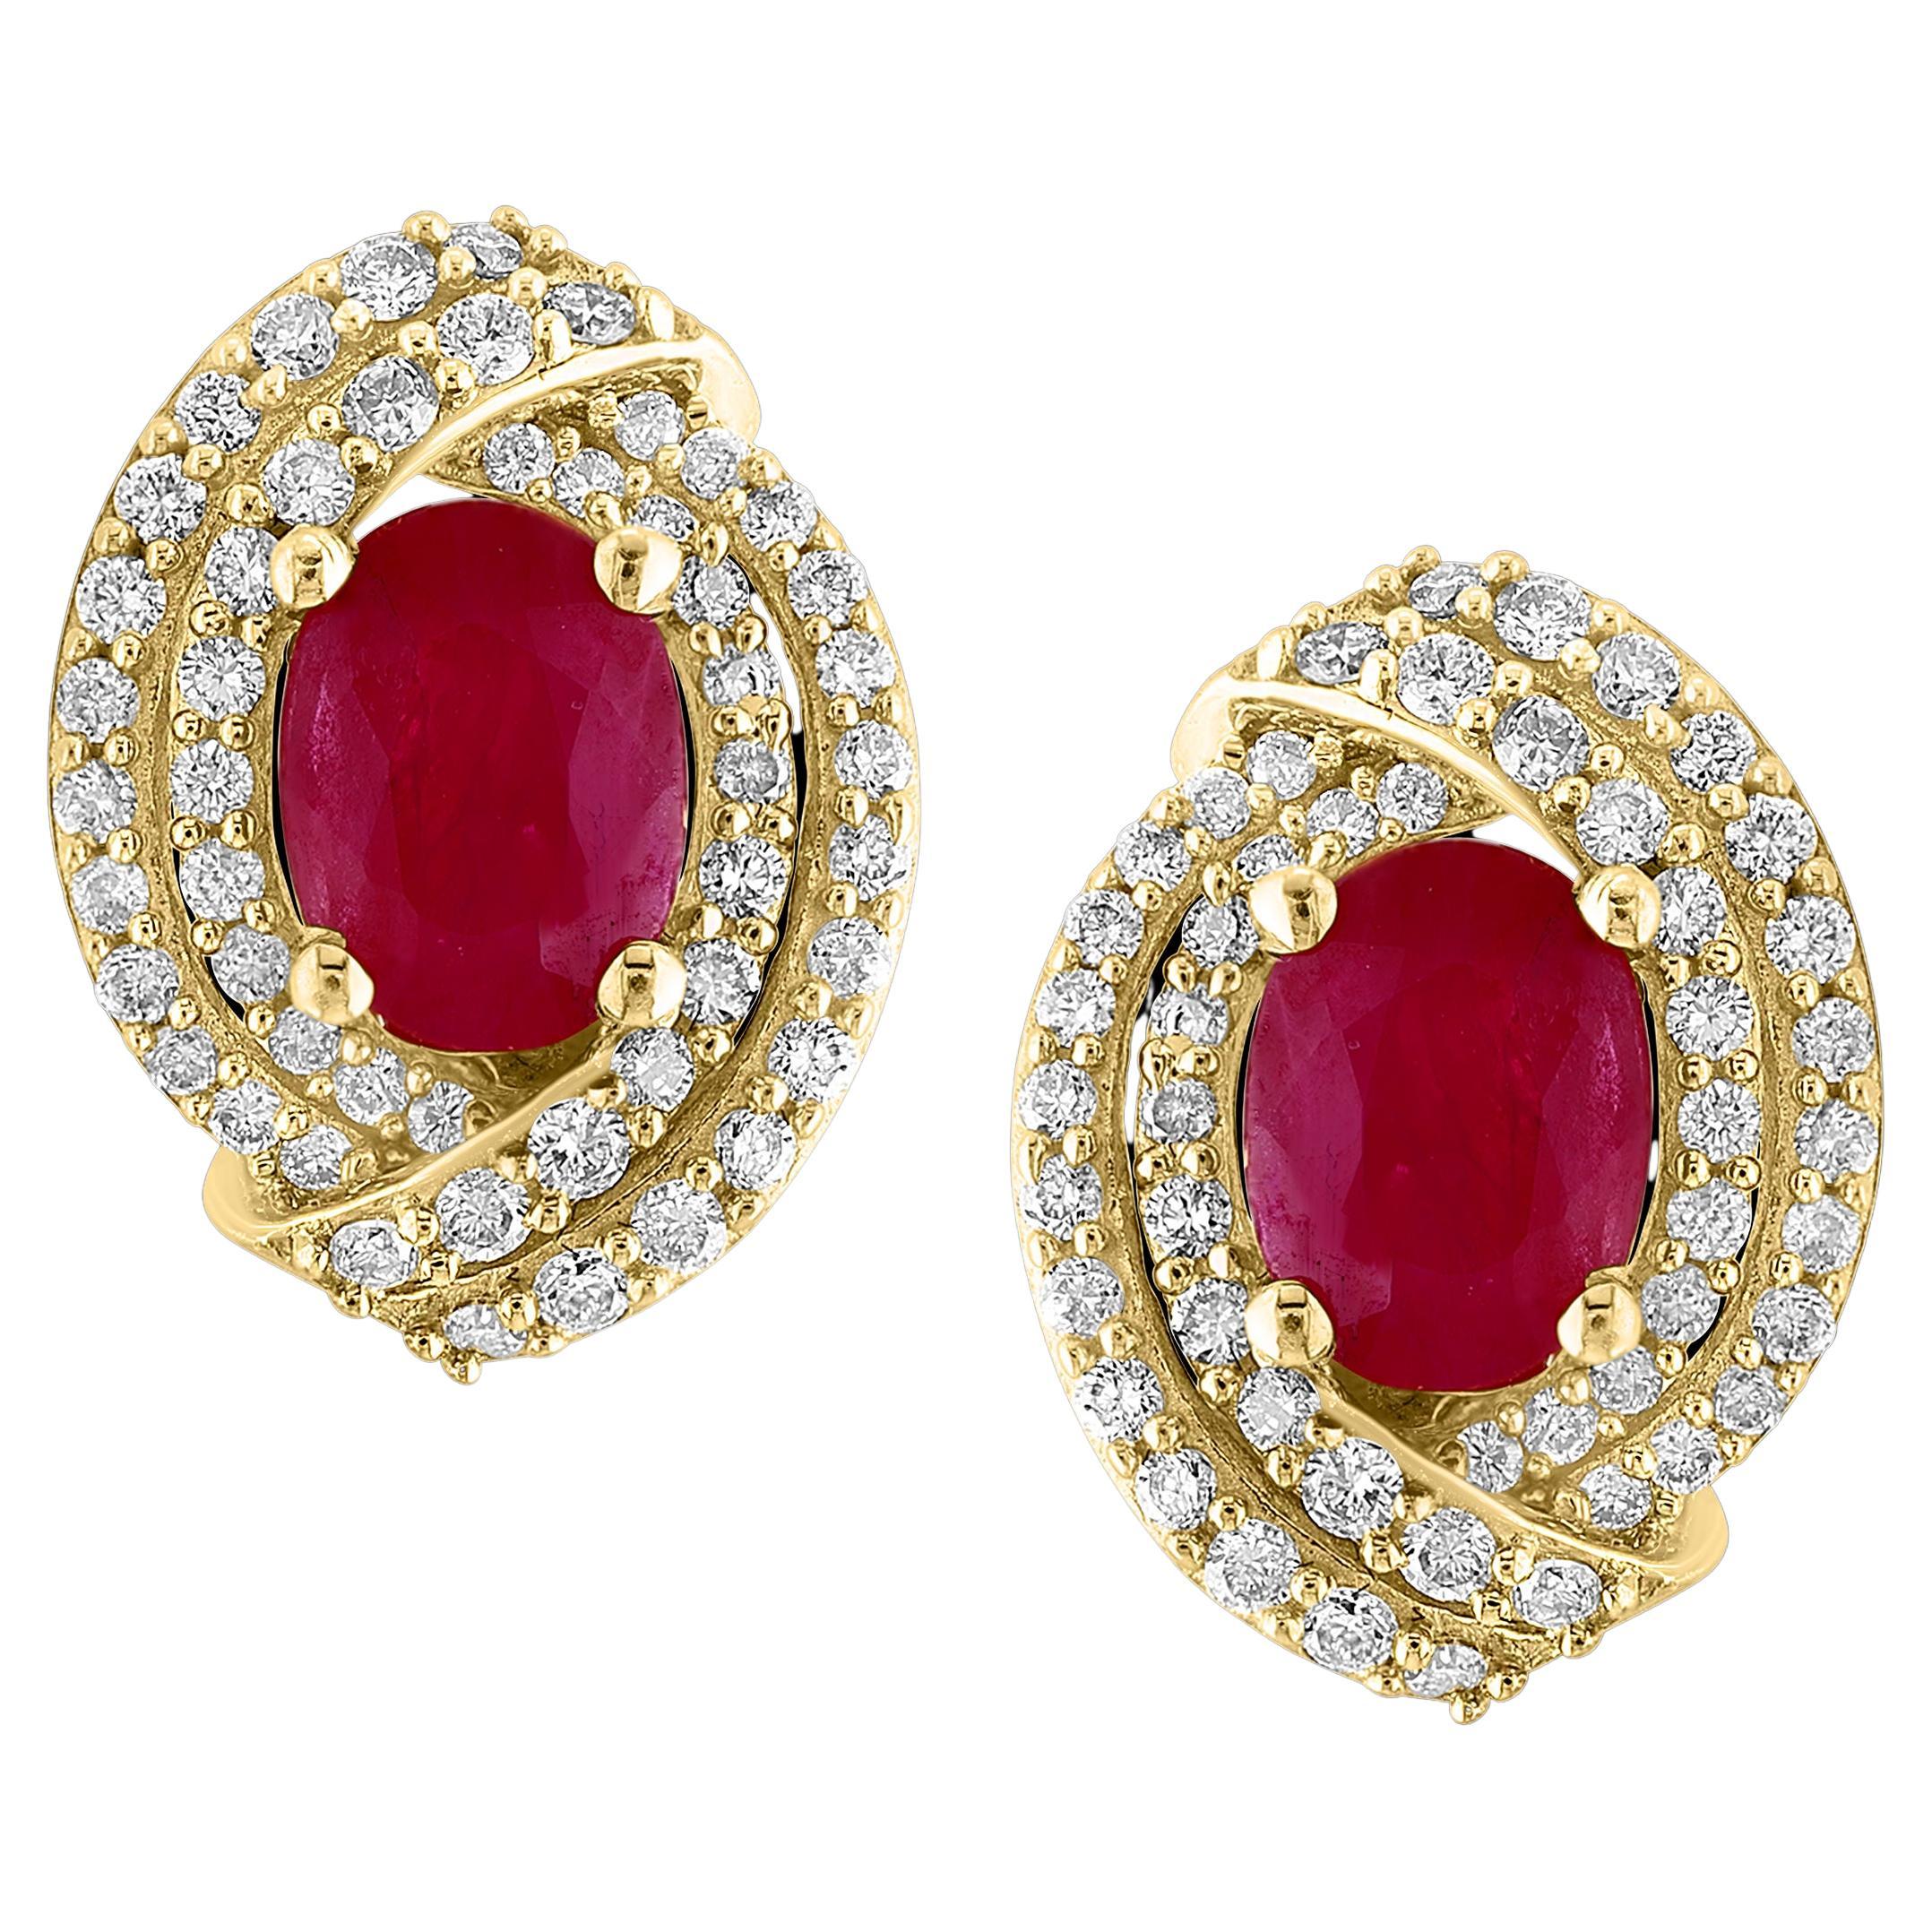 3.5 Carat Oval Natural  Ruby & 1.2 Ct Diamond Stud Earrings 14 Karat Yellow Gold For Sale